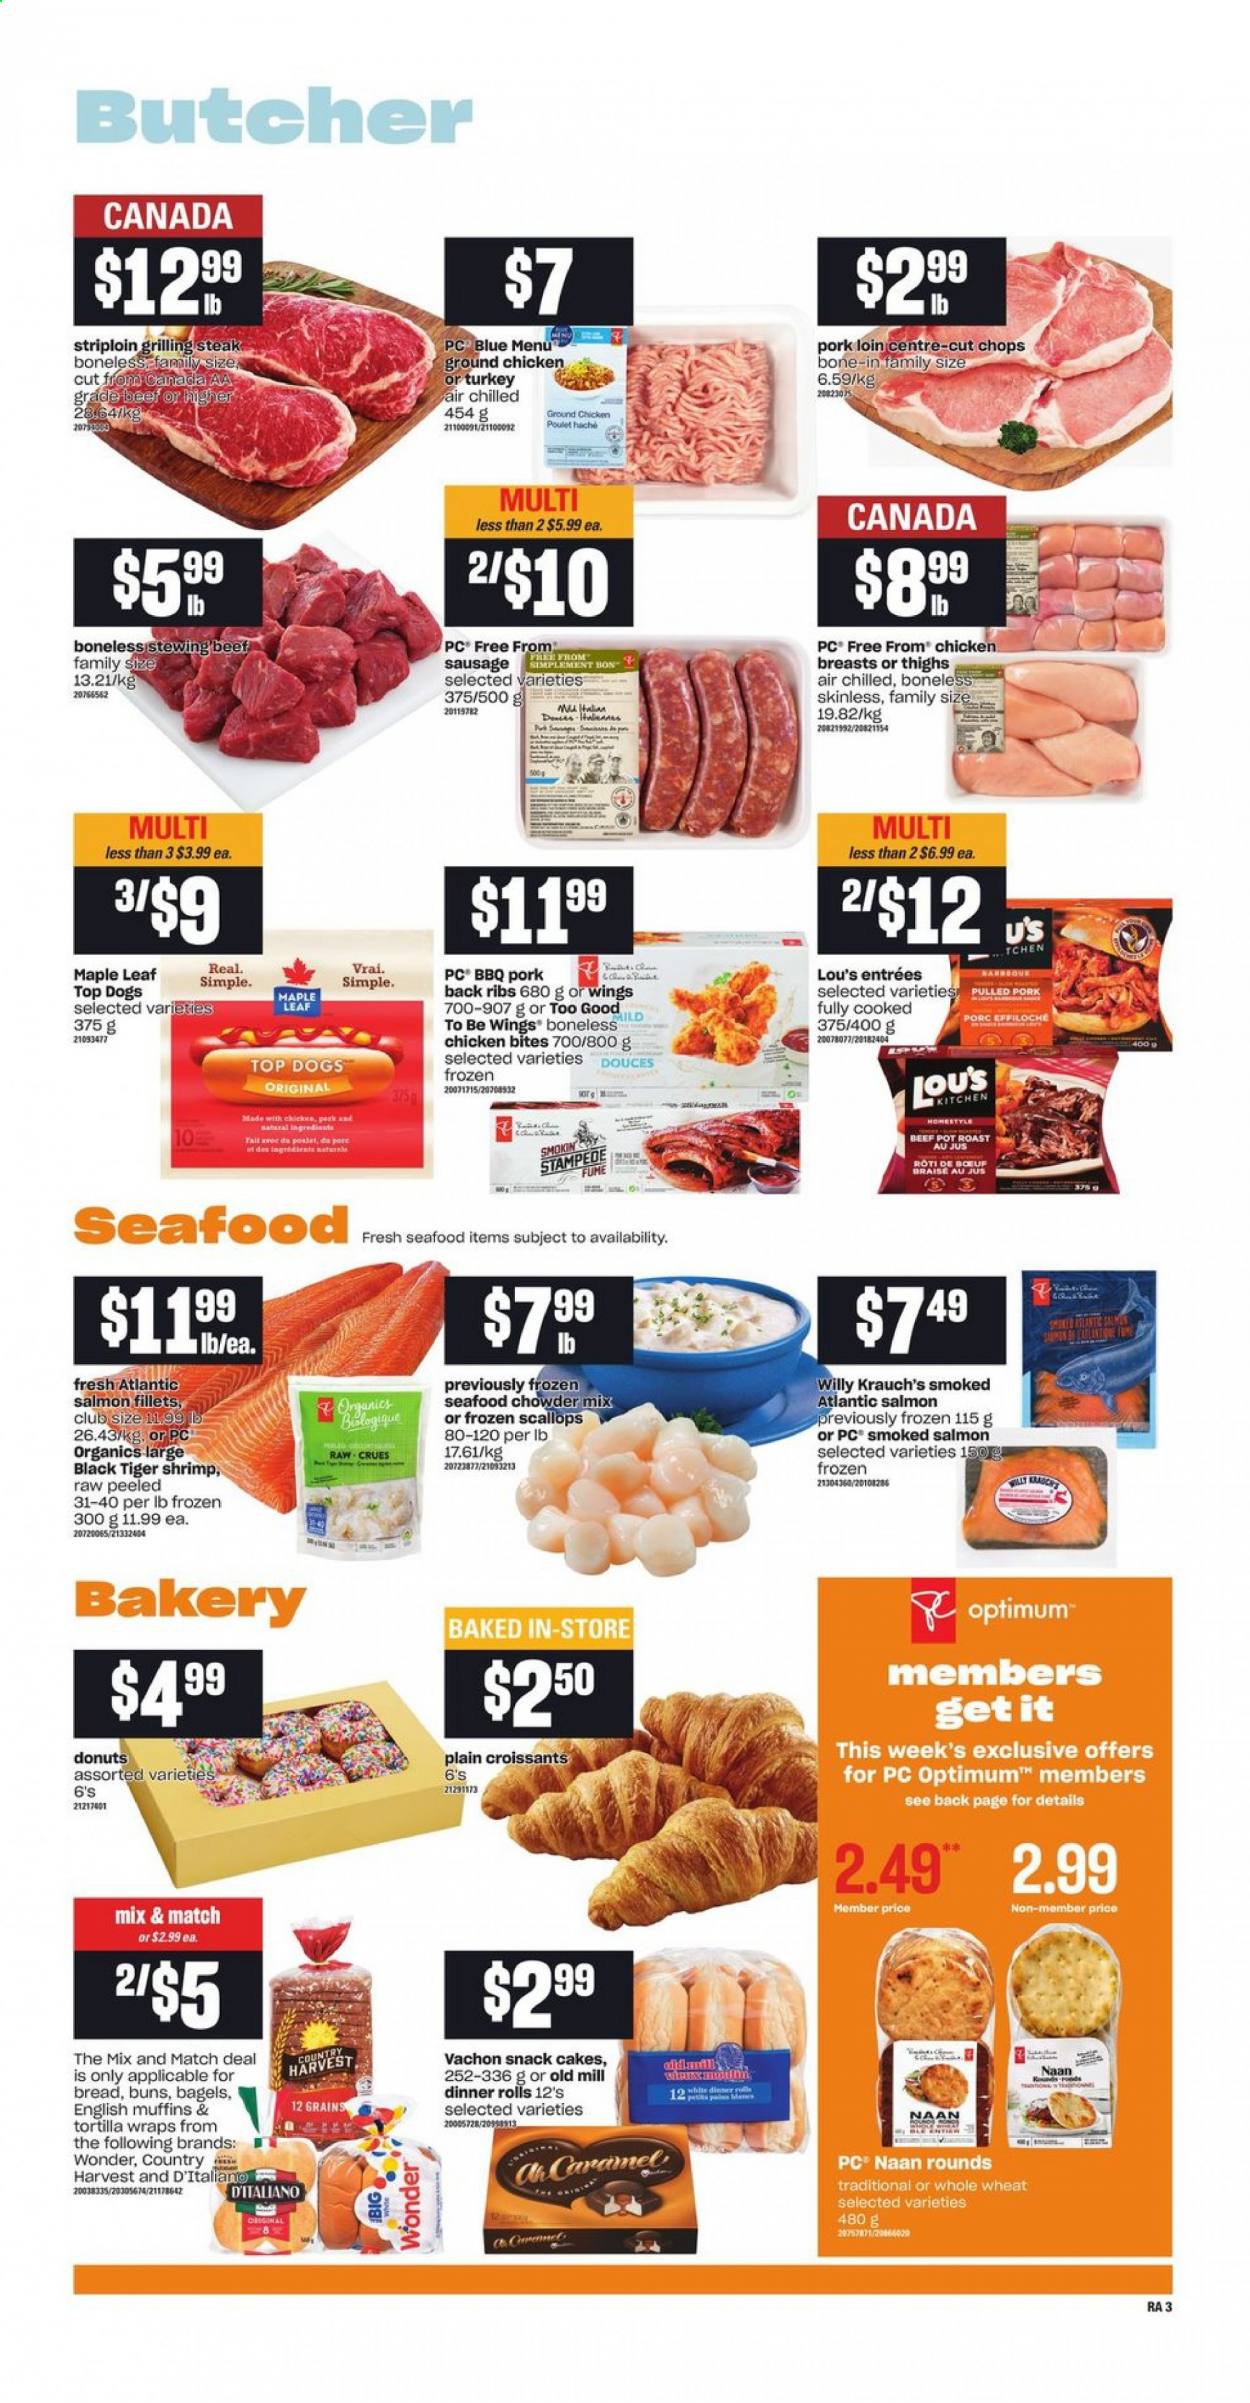 thumbnail - Atlantic Superstore Flyer - April 29, 2021 - May 05, 2021 - Sales products - bagels, english muffins, tortillas, cake, dinner rolls, croissant, buns, wraps, donut, salmon, salmon fillet, scallops, smoked salmon, seafood, shrimps, pulled pork, sausage, Country Harvest, chicken bites, snack, caramel, ground chicken, chicken breasts, chicken, beef meat, stewing beef, pork loin, pork meat, Optimum, pot, steak. Page 4.